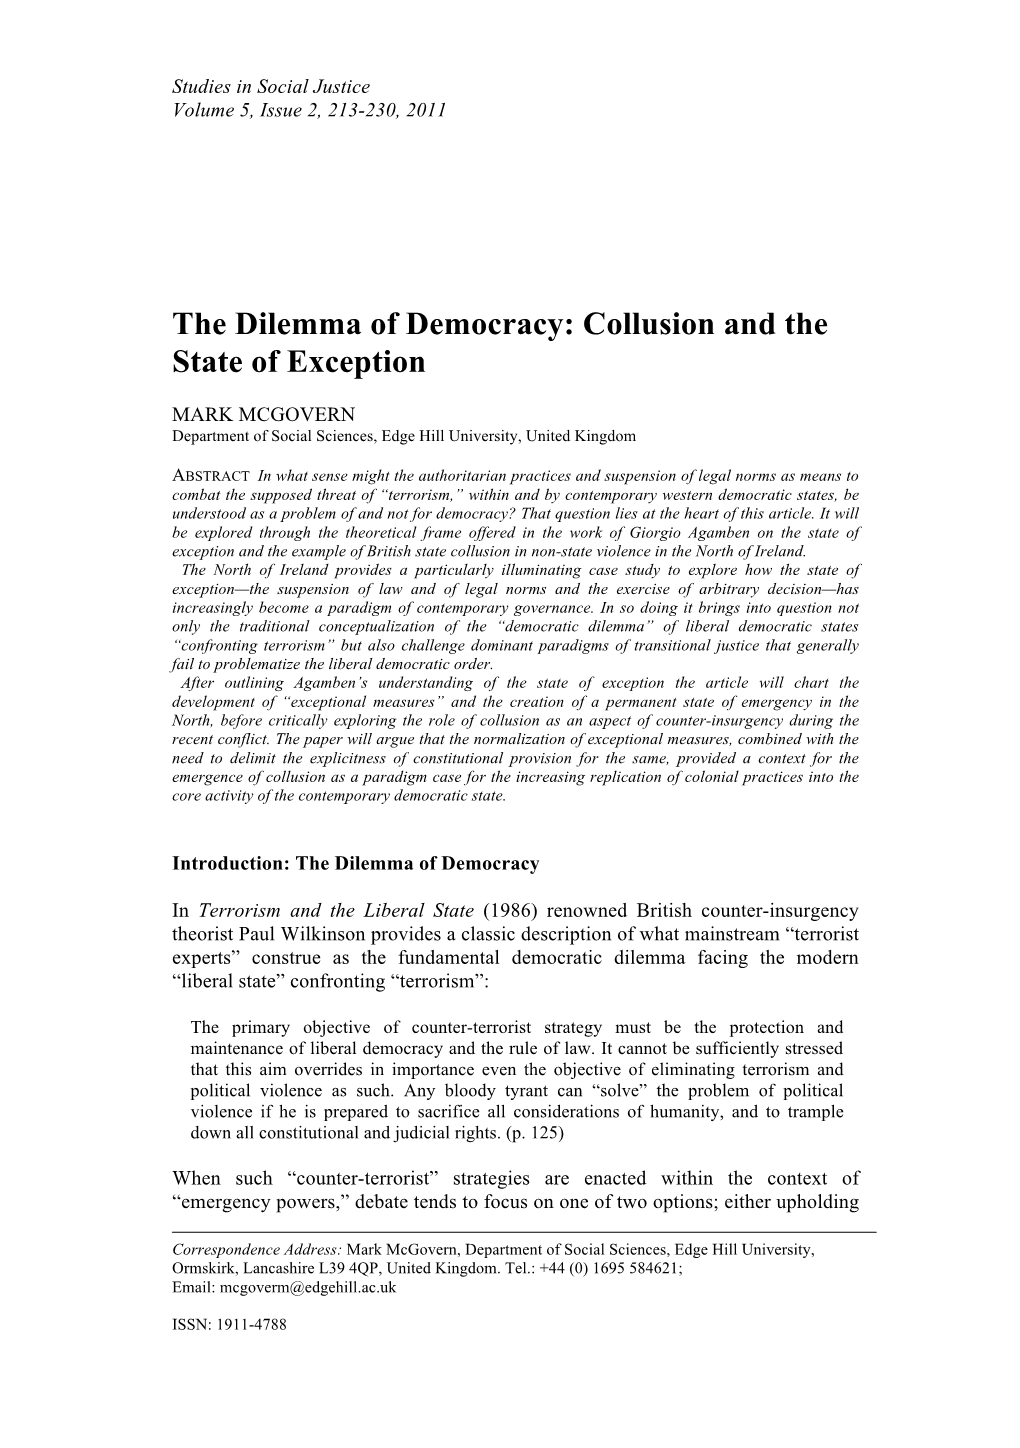 The Dilemma of Democracy: Collusion and the State of Exception